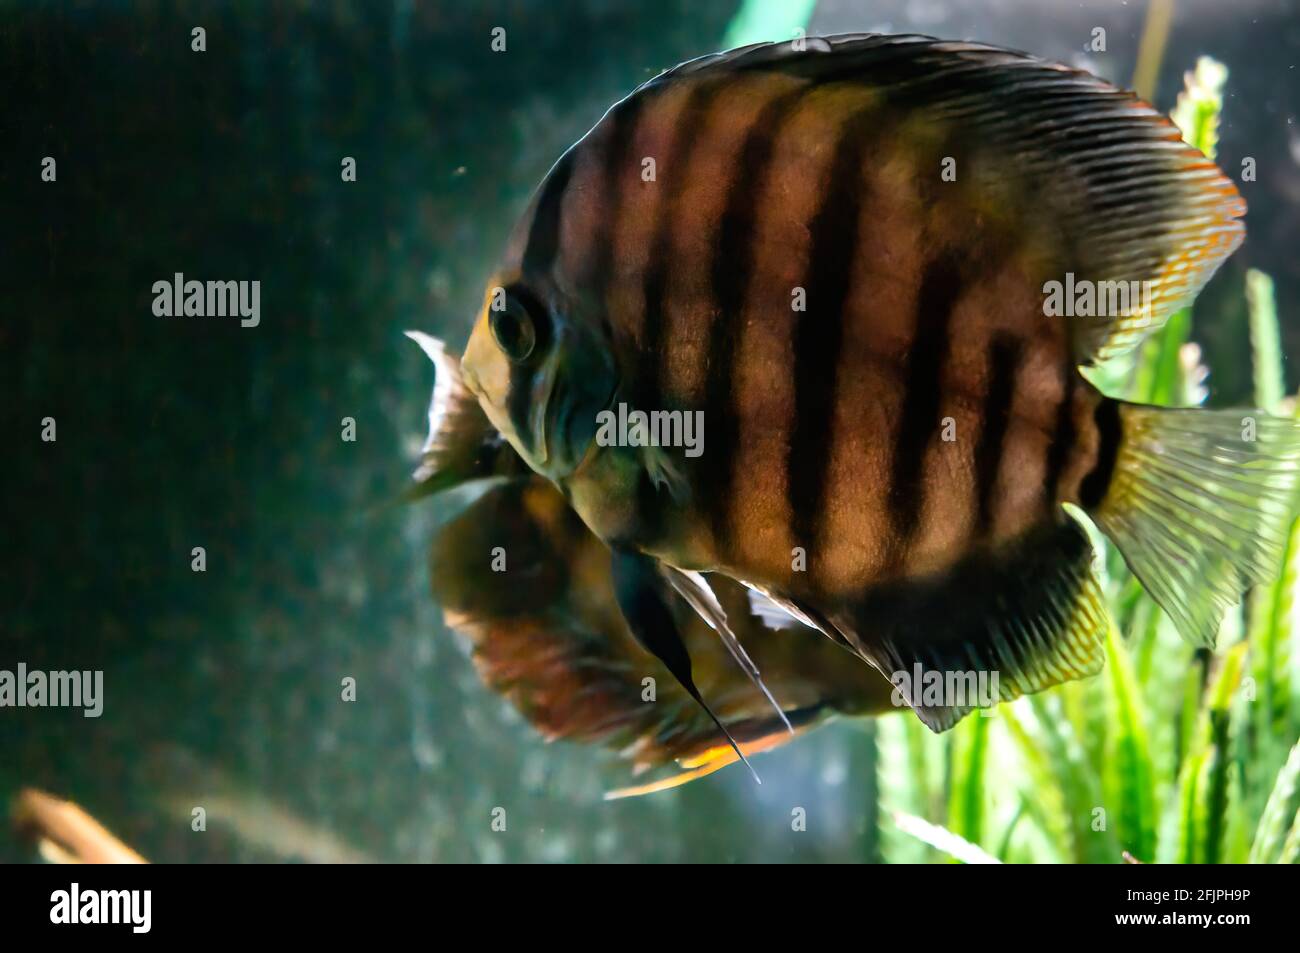 A brown Discus fish (Symphysodon - a genus of cichlids native to